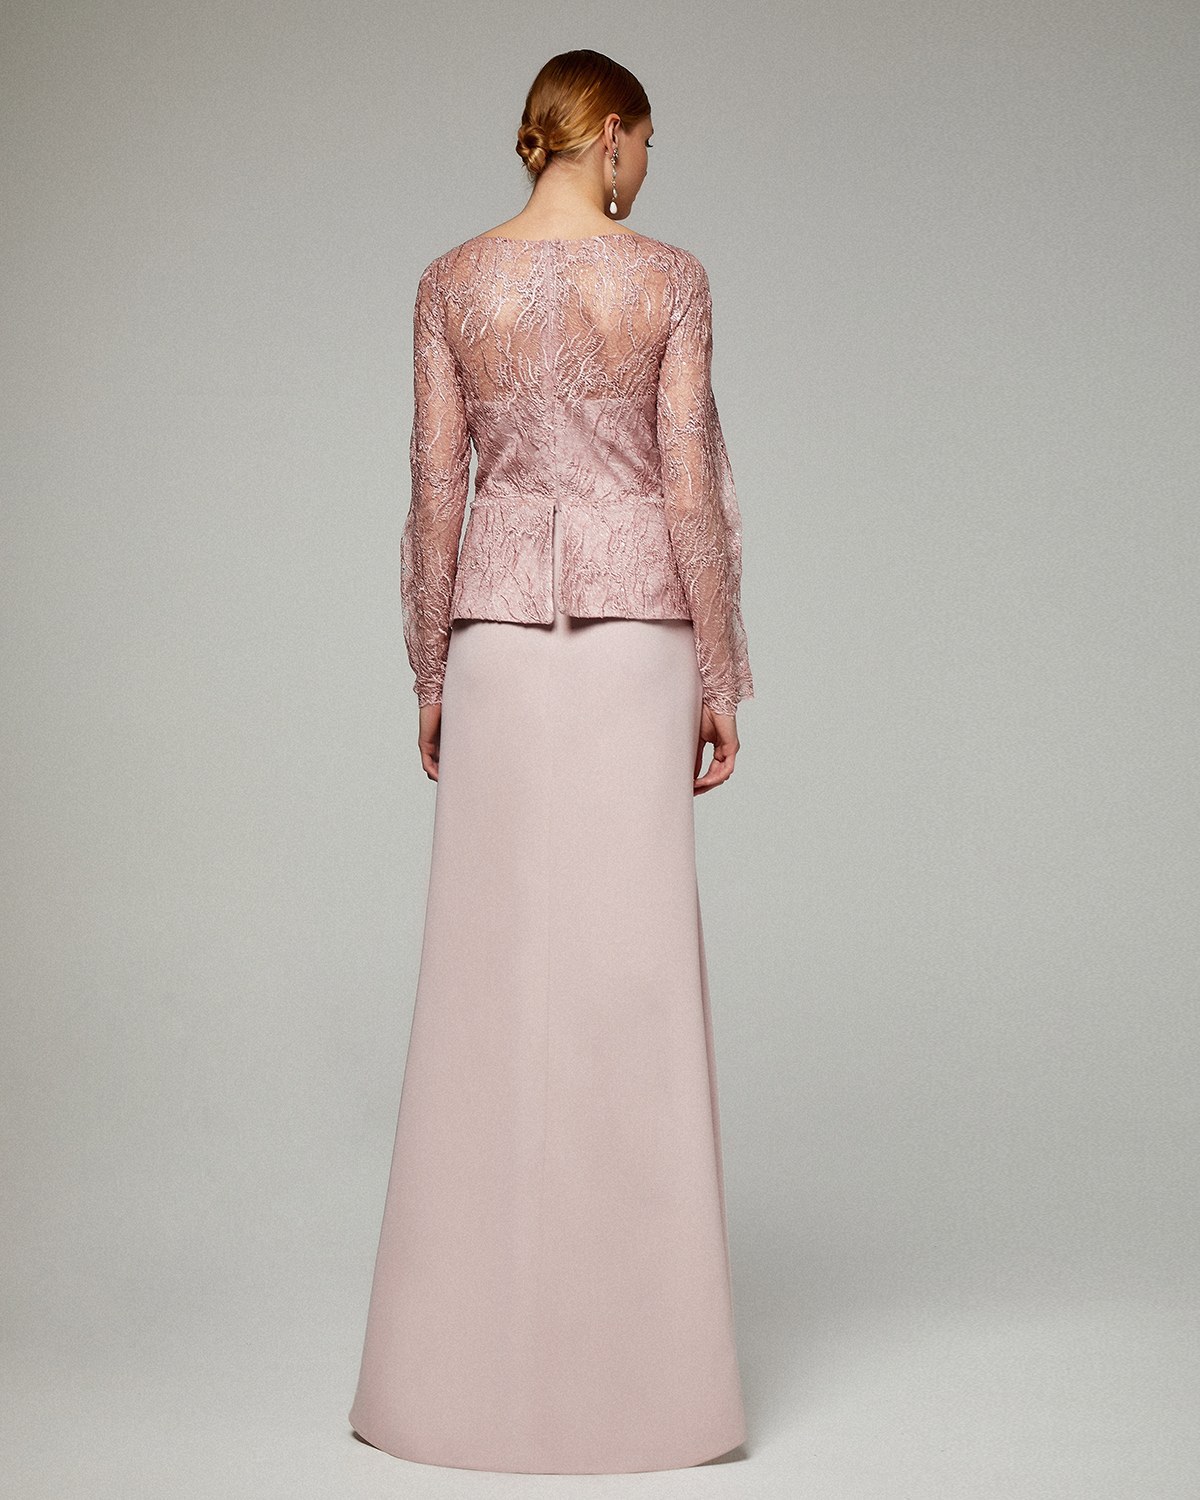 Classic Dresses / Long evening dress with lace top and long sleeves for the mother of the bride